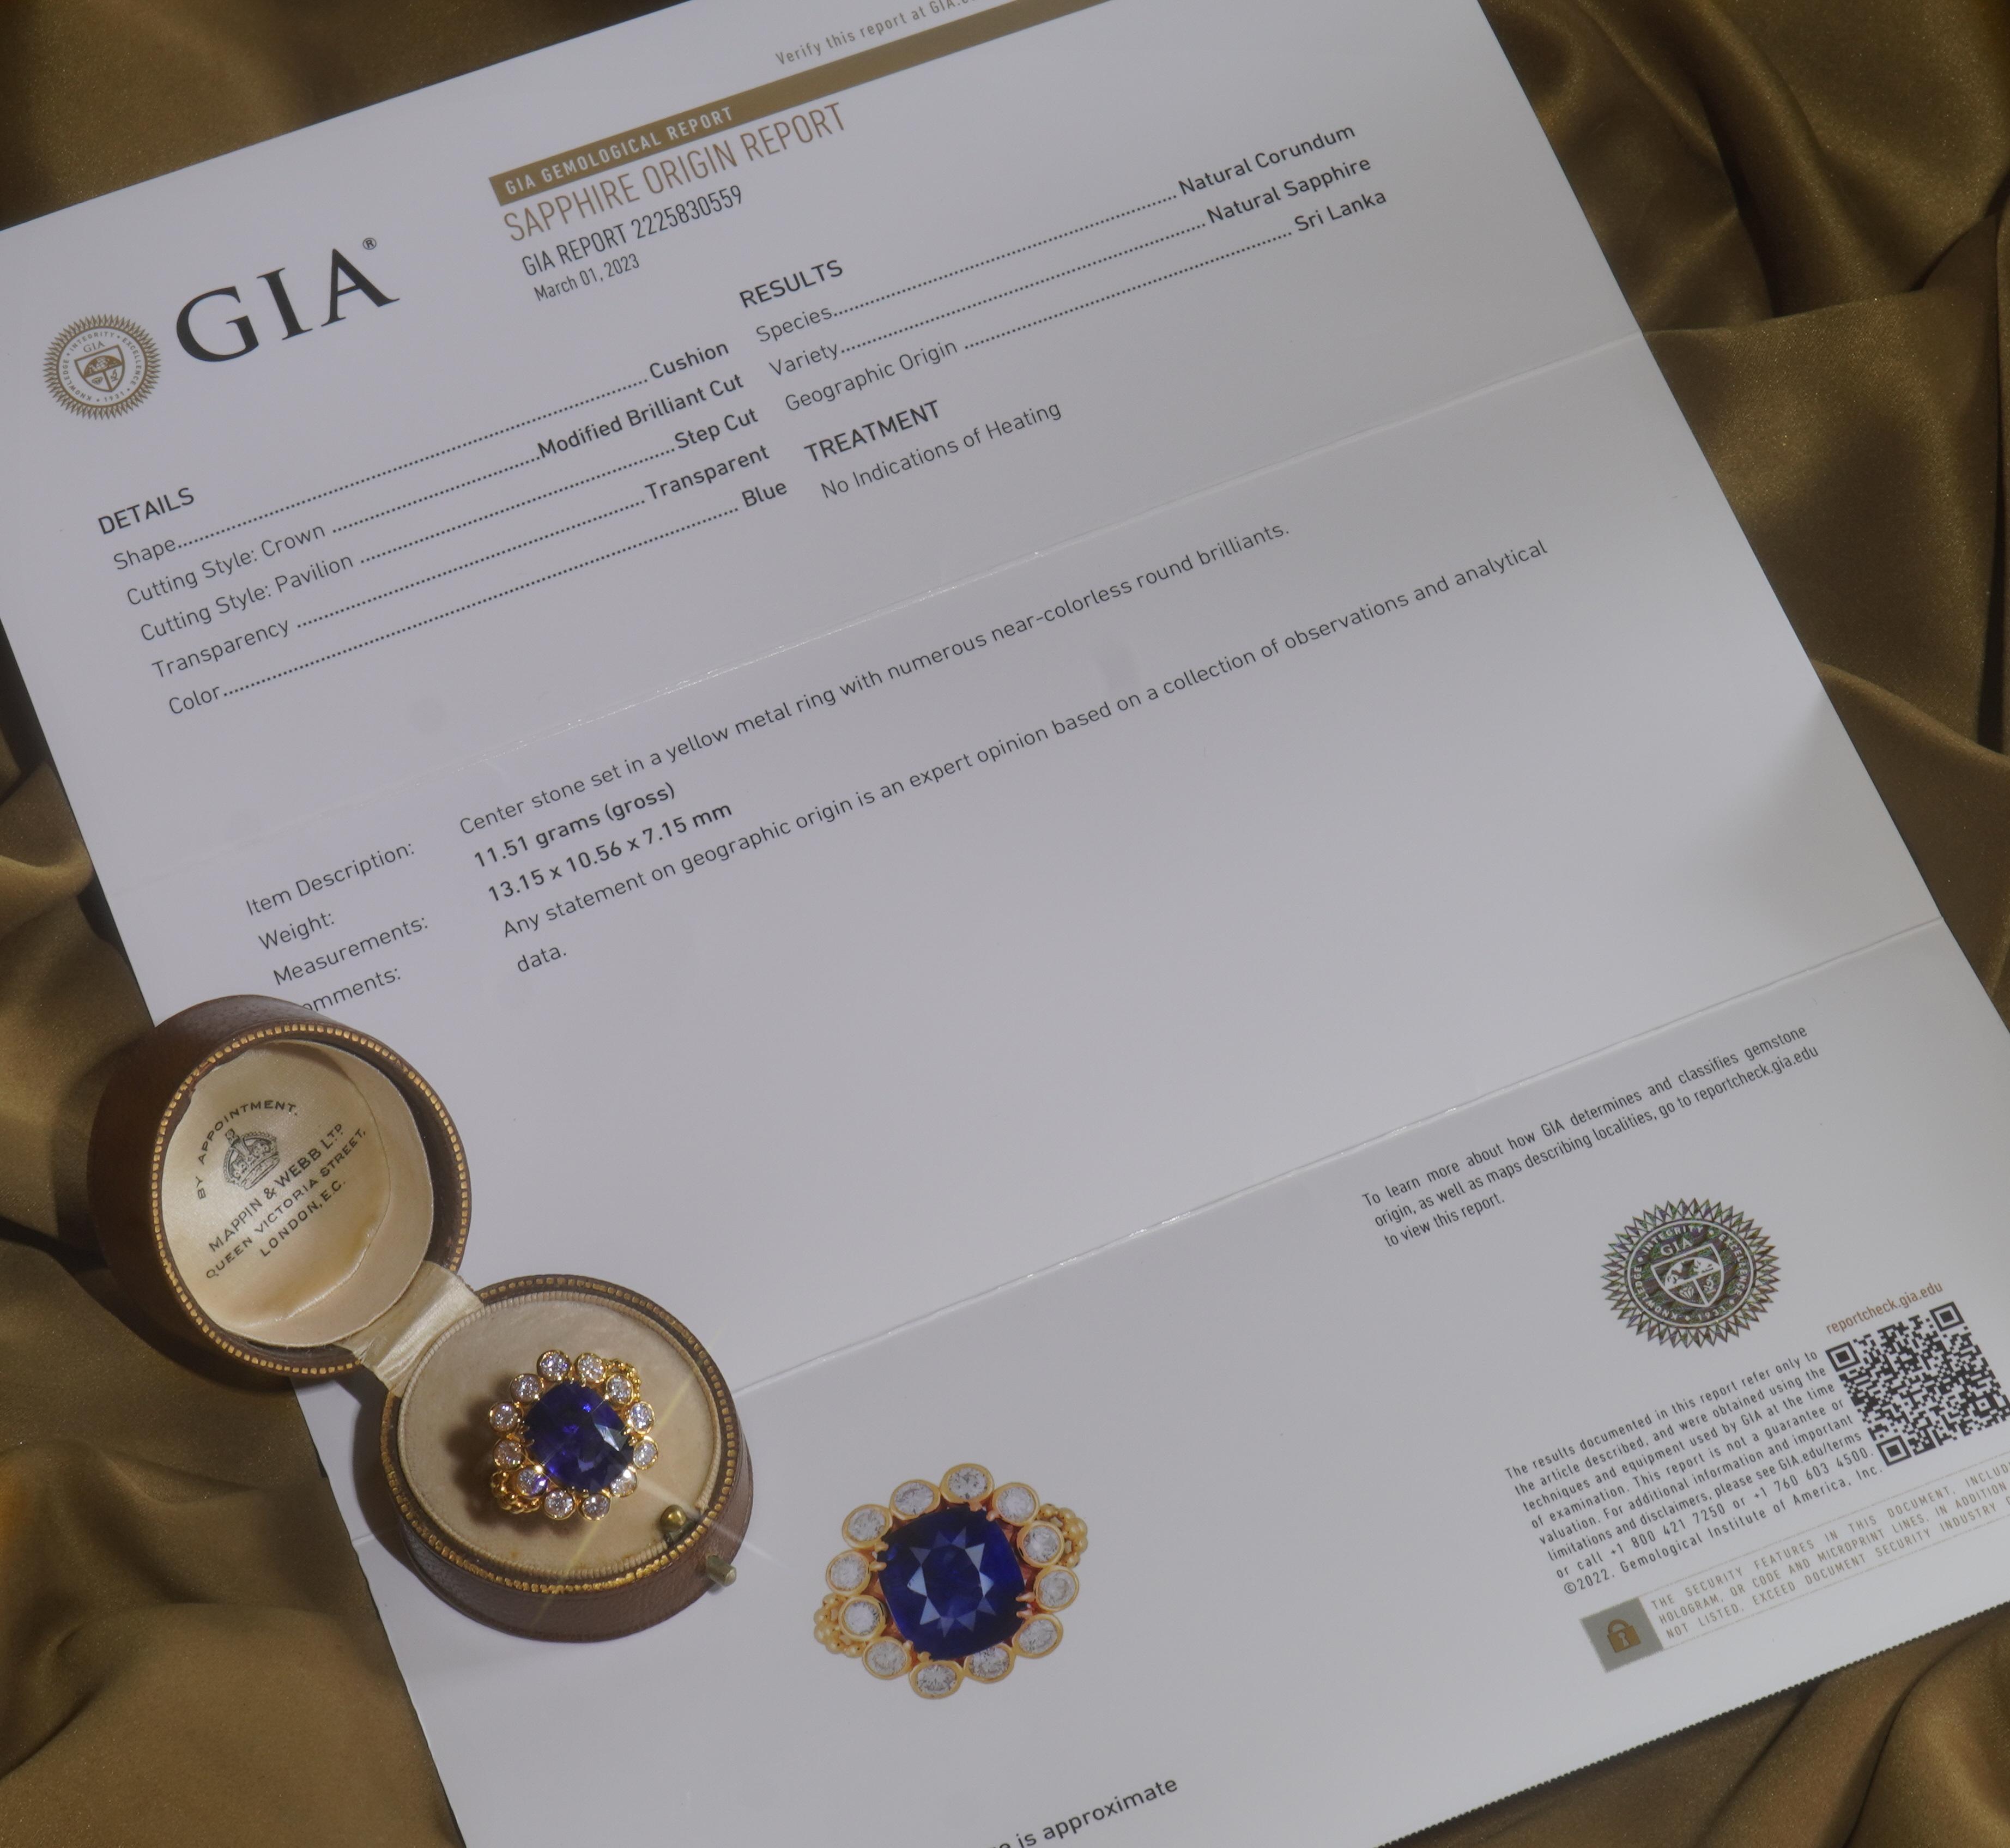 Old South Jewels proudly presents... VINTAGE LUXURY.   GIA CERTIFIED 18K GOLD HUGE 12.04 CARAT UNHEATED SAPPHIRE DIAMOND ANTIQUE RING & BOX!   HUGE 9.52 CARAT BRILLIANT ROYAL BLUE GIA CERTIFIED RARE NO HEAT NATURAL SAPPHIRE.   This Gorgeous Sapphire